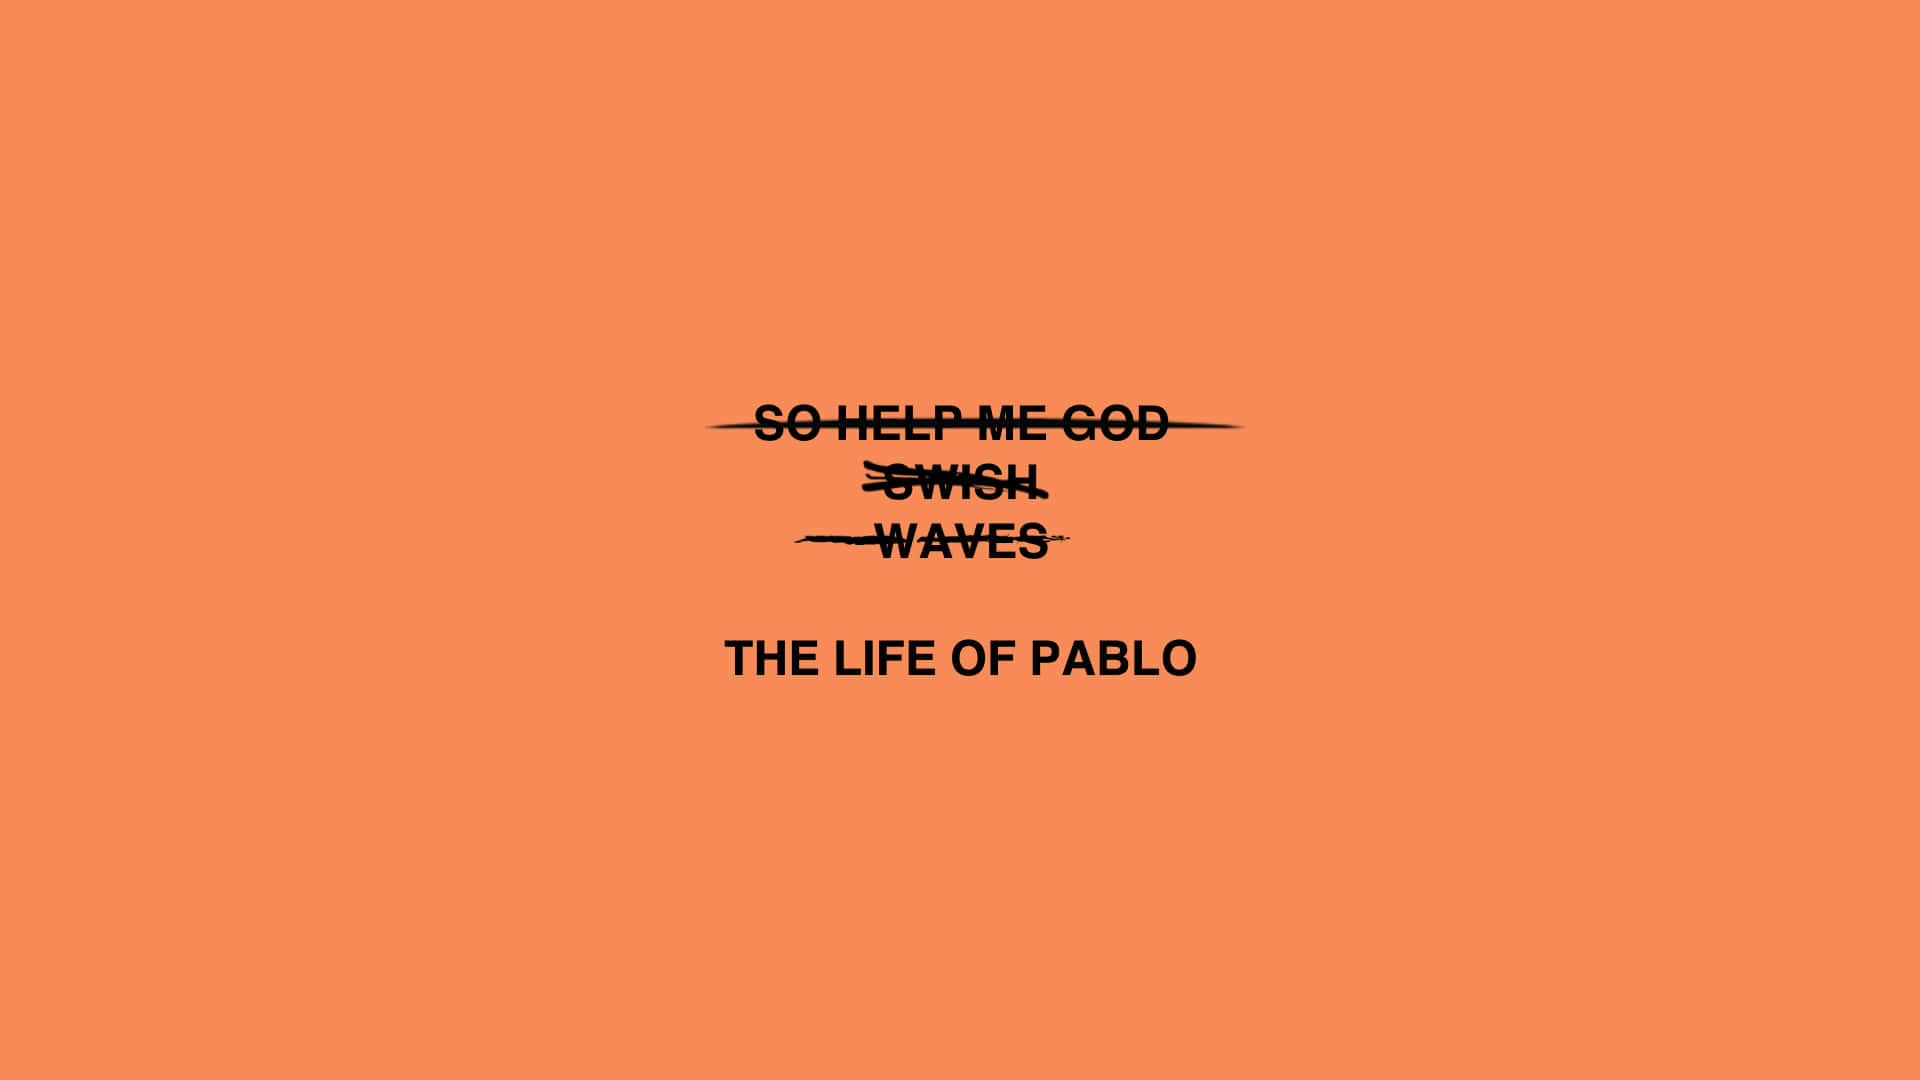 "The Life of Pablo" - Kanye West Wallpaper